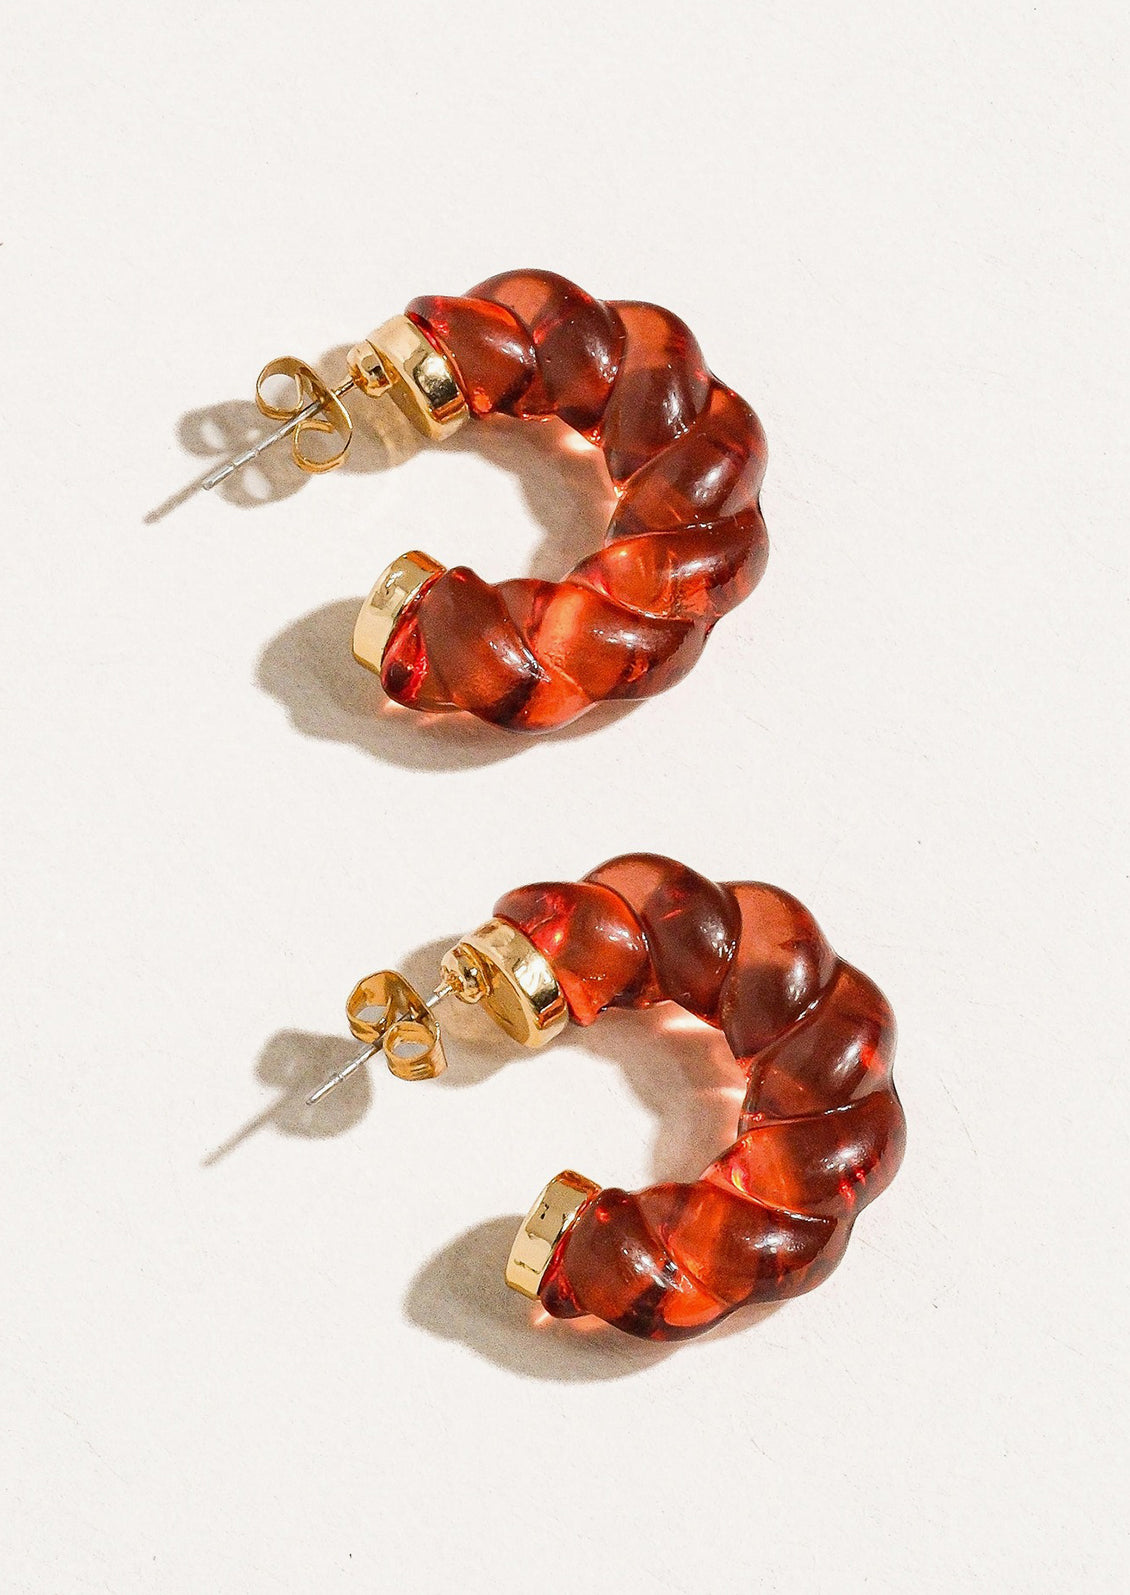 A pair of transparent lucite hoop earrings with spiral twist texture in ruby red.